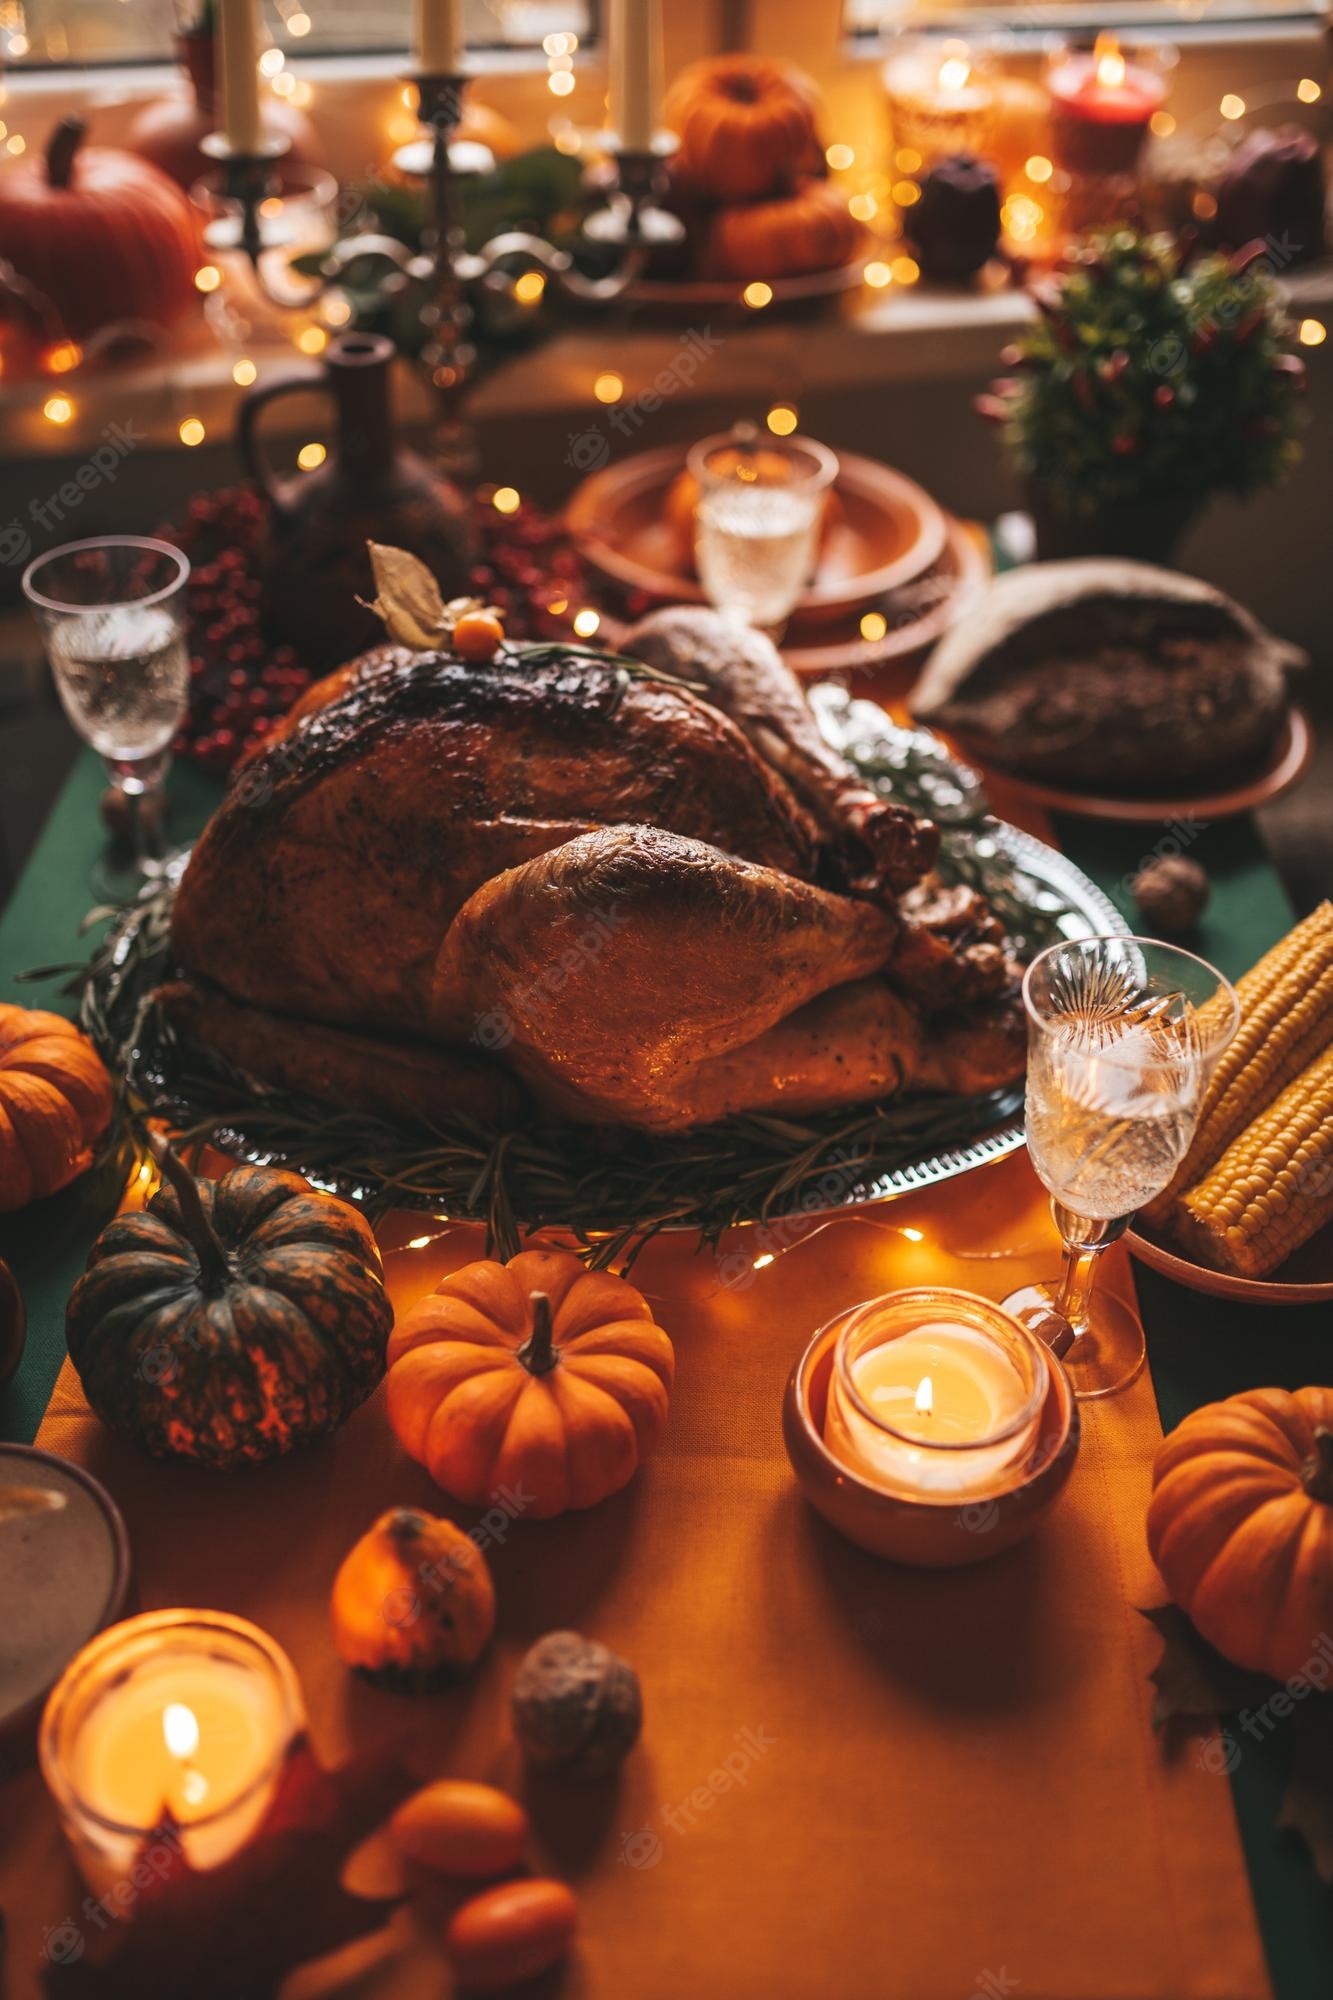 Rustic Thanksgiving Decorations Wallpapers - Wallpaper Cave